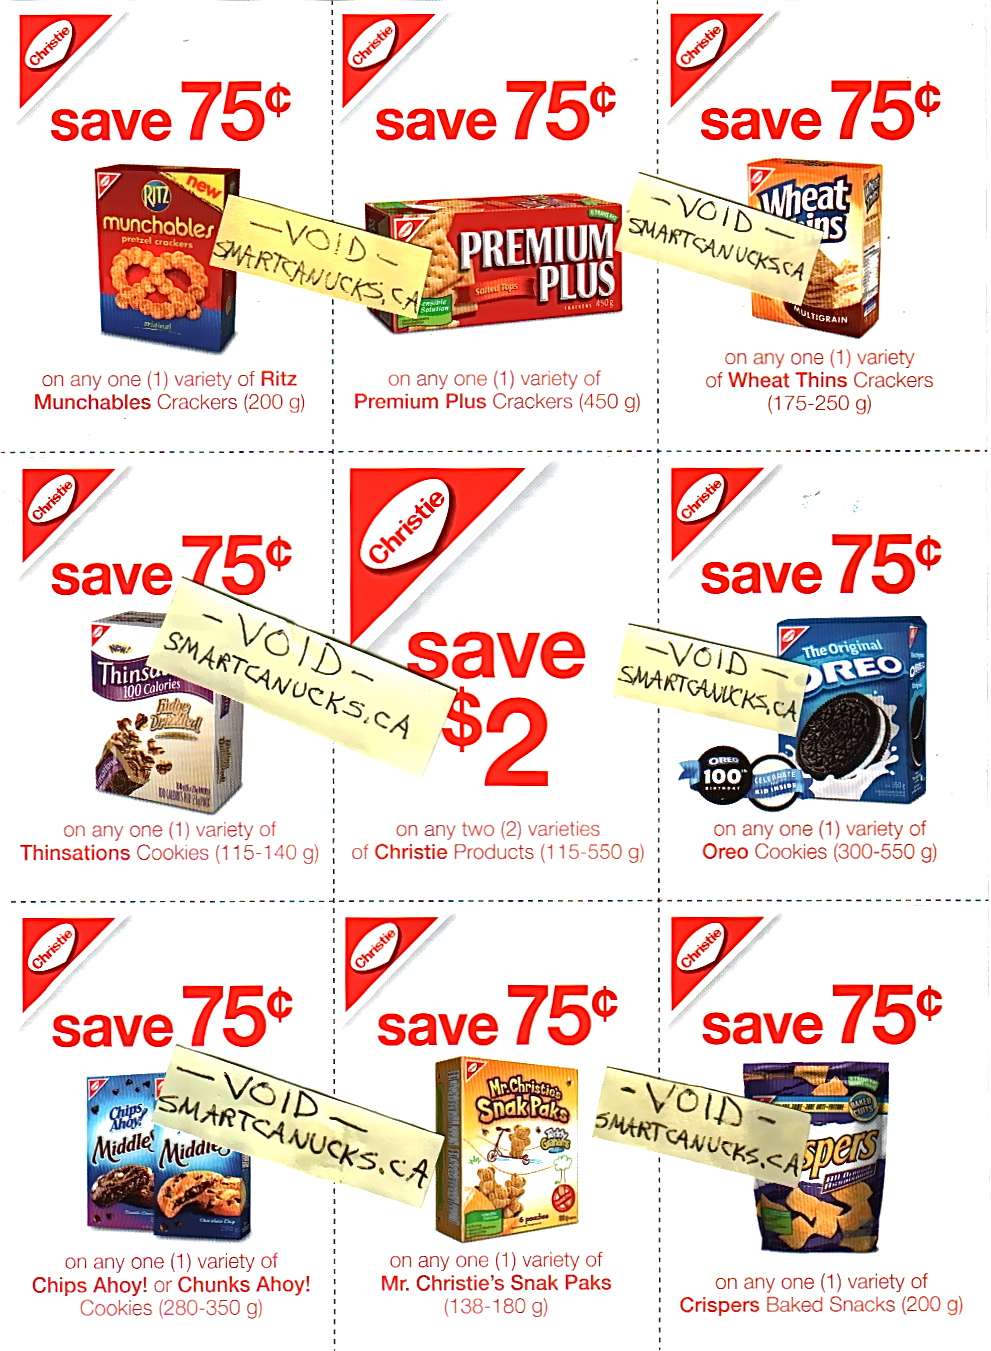 Kraft's Summer 2012 What's Cooking Magazine: Coupons inside! - Page 3